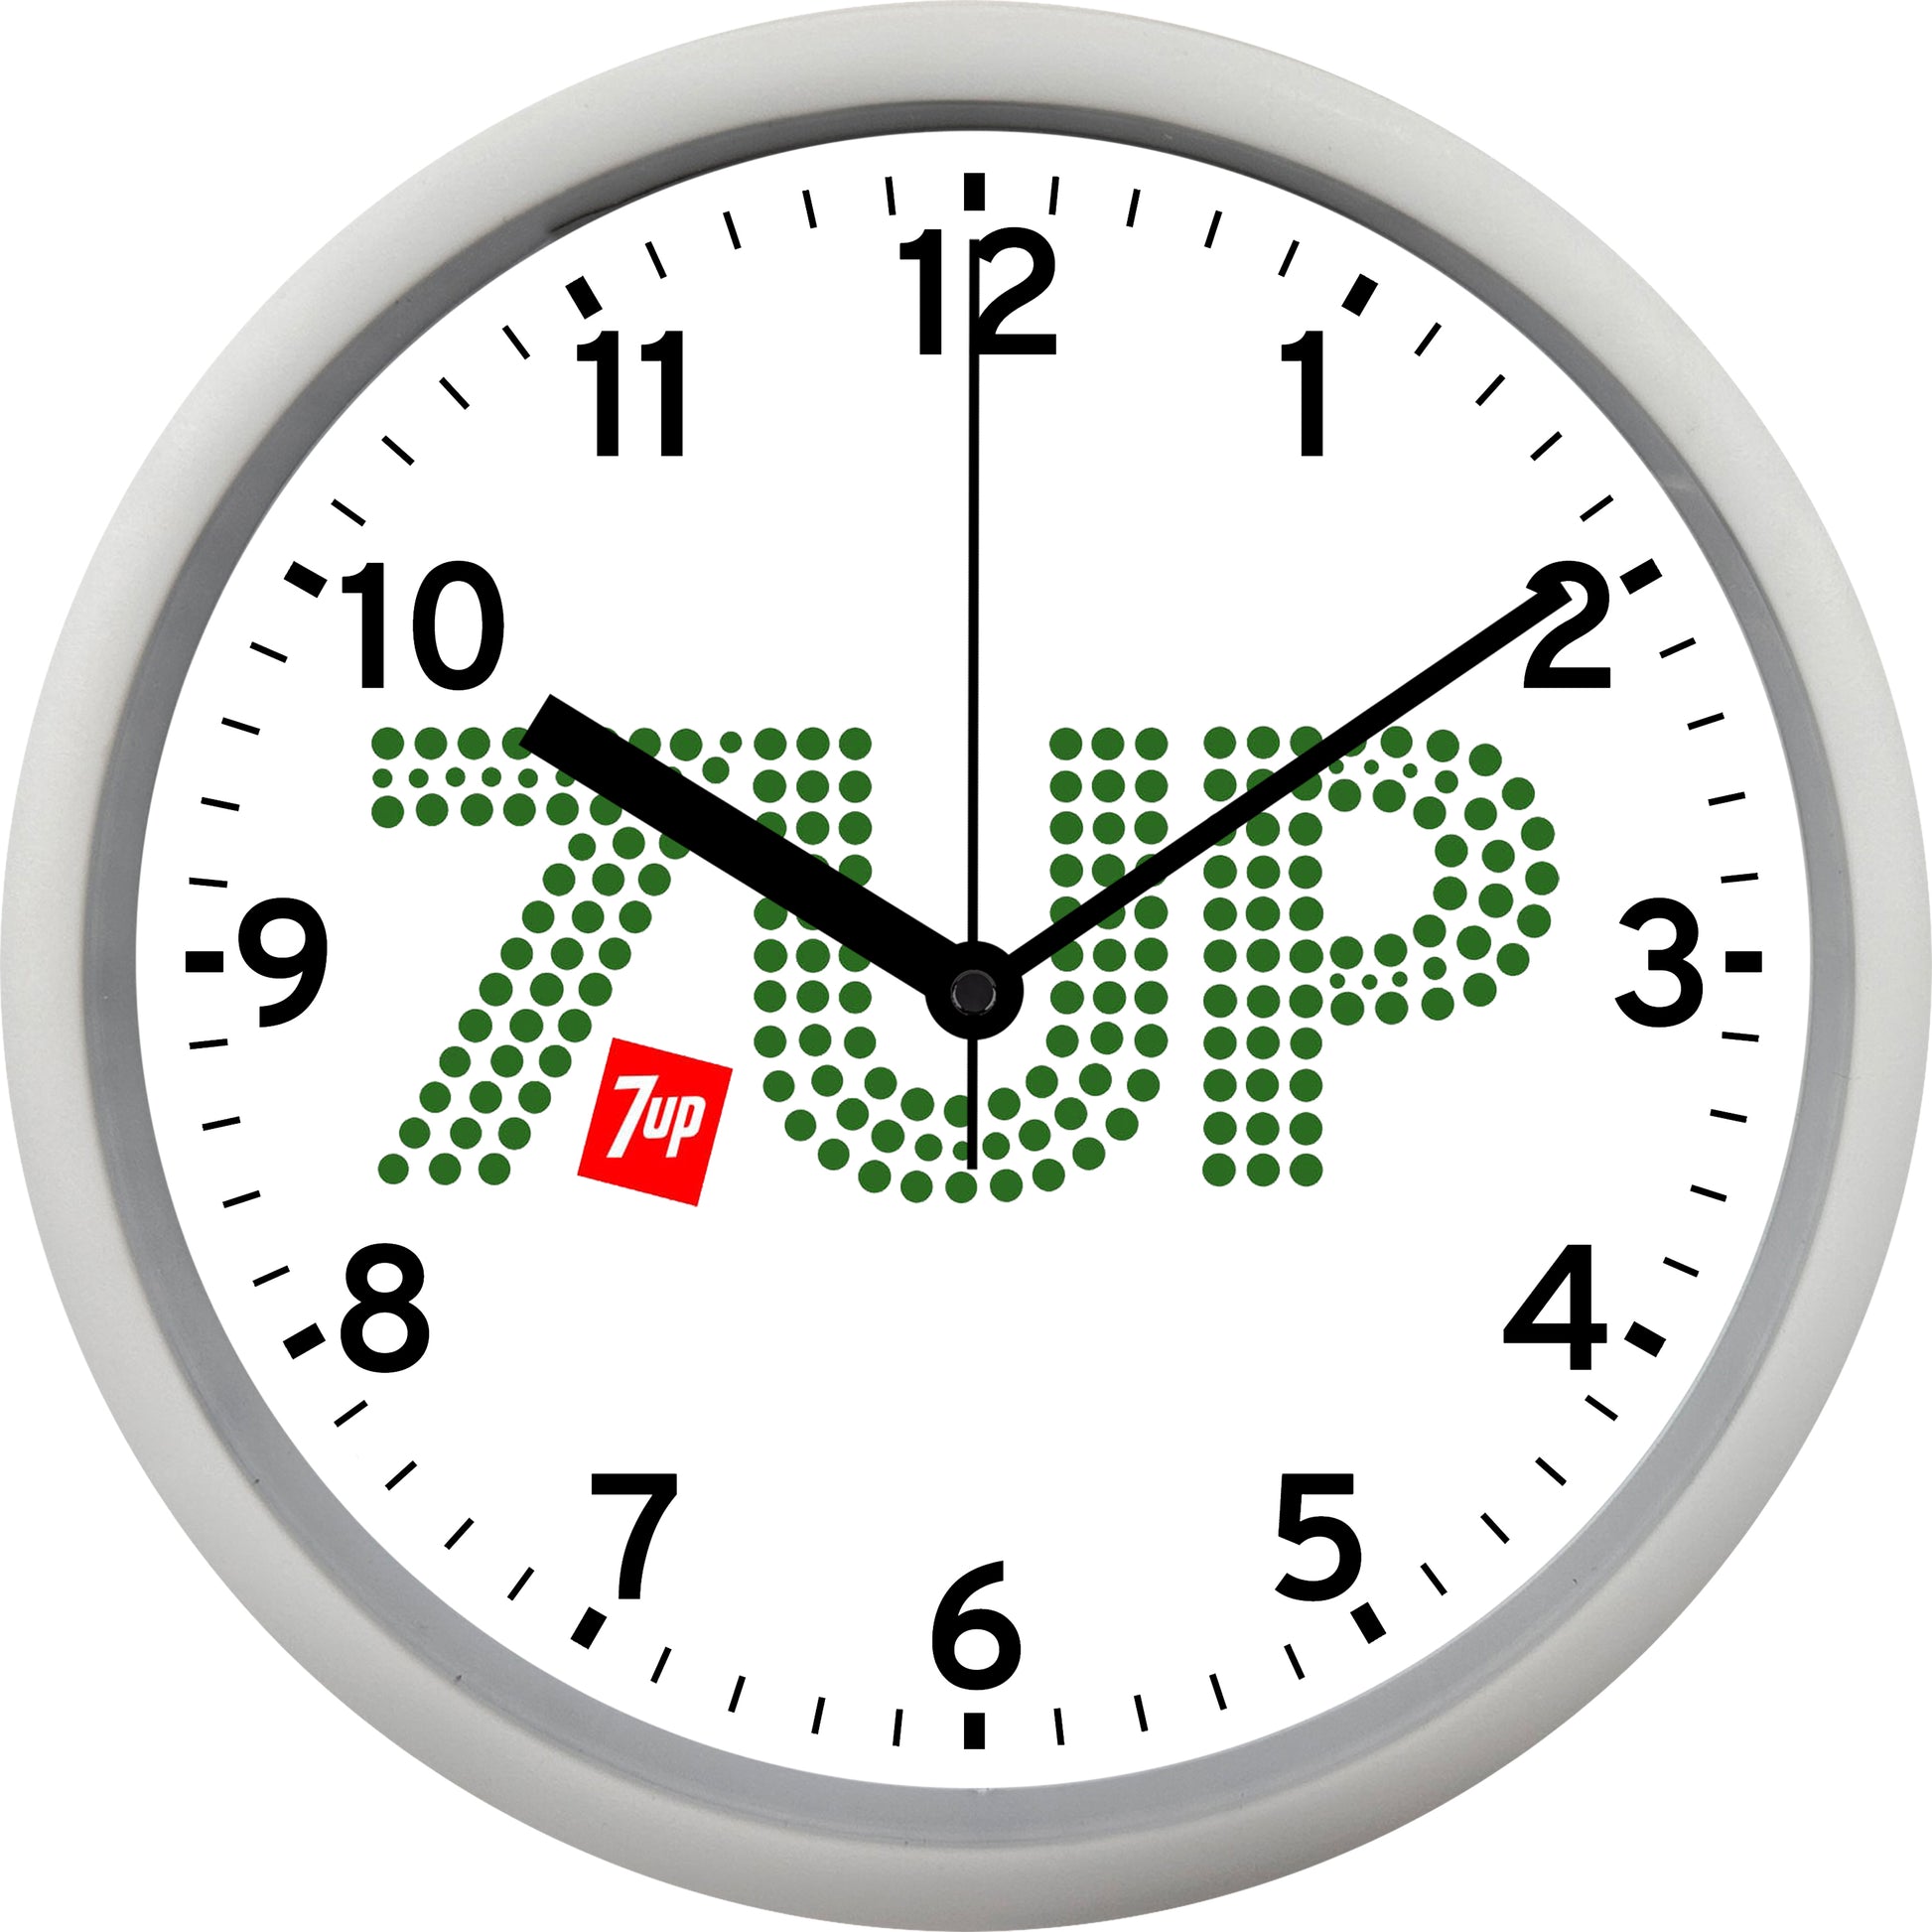 7UP Soft Drink - Logo Used from 1975-1980 Wall Clock